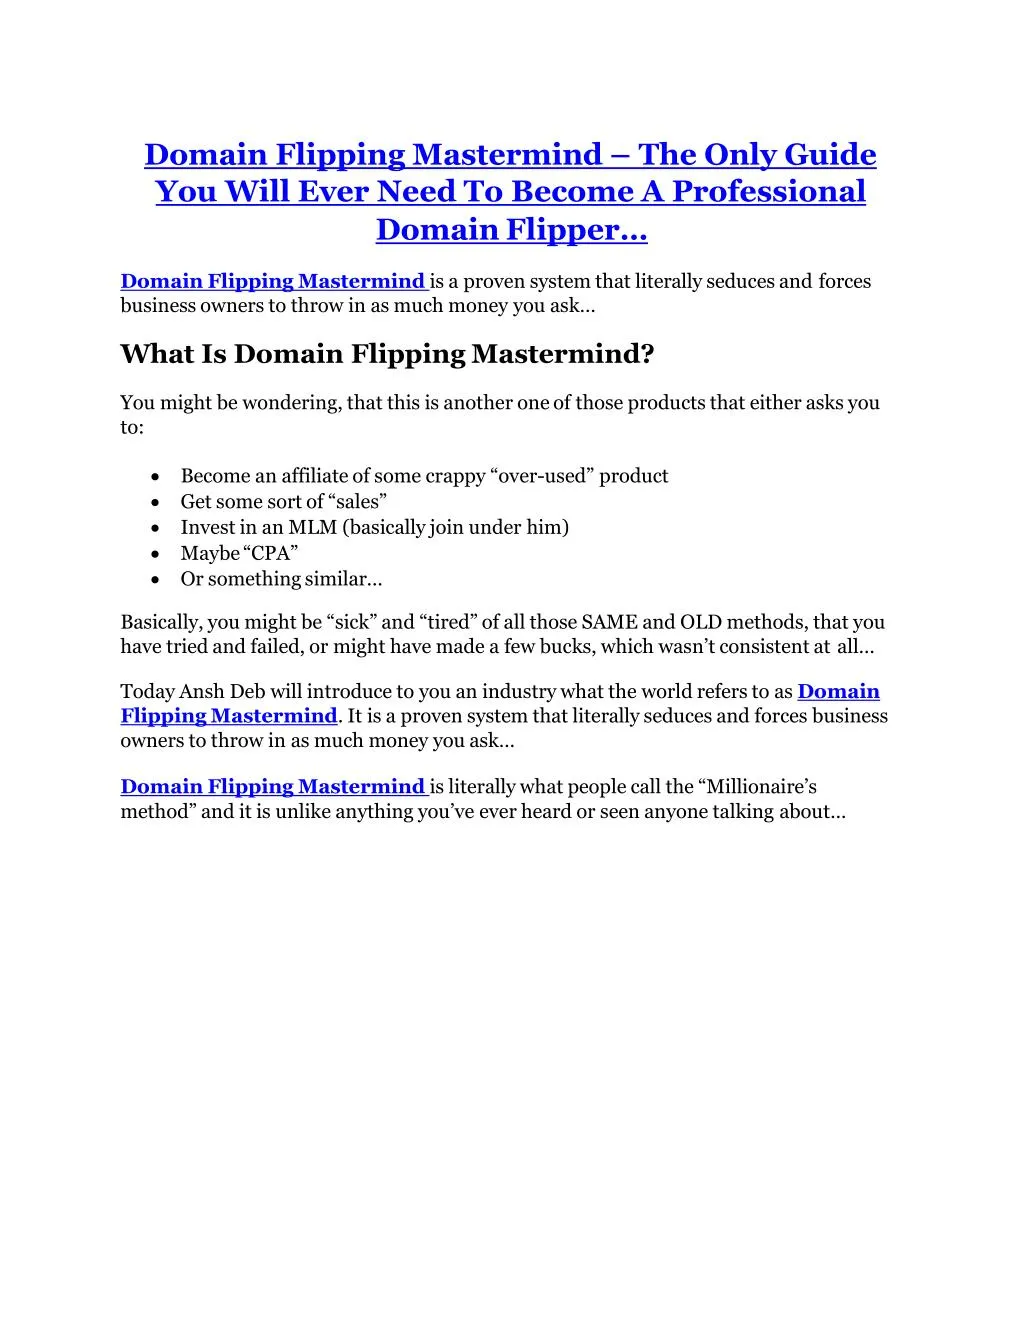 domain flipping mastermind the only guide